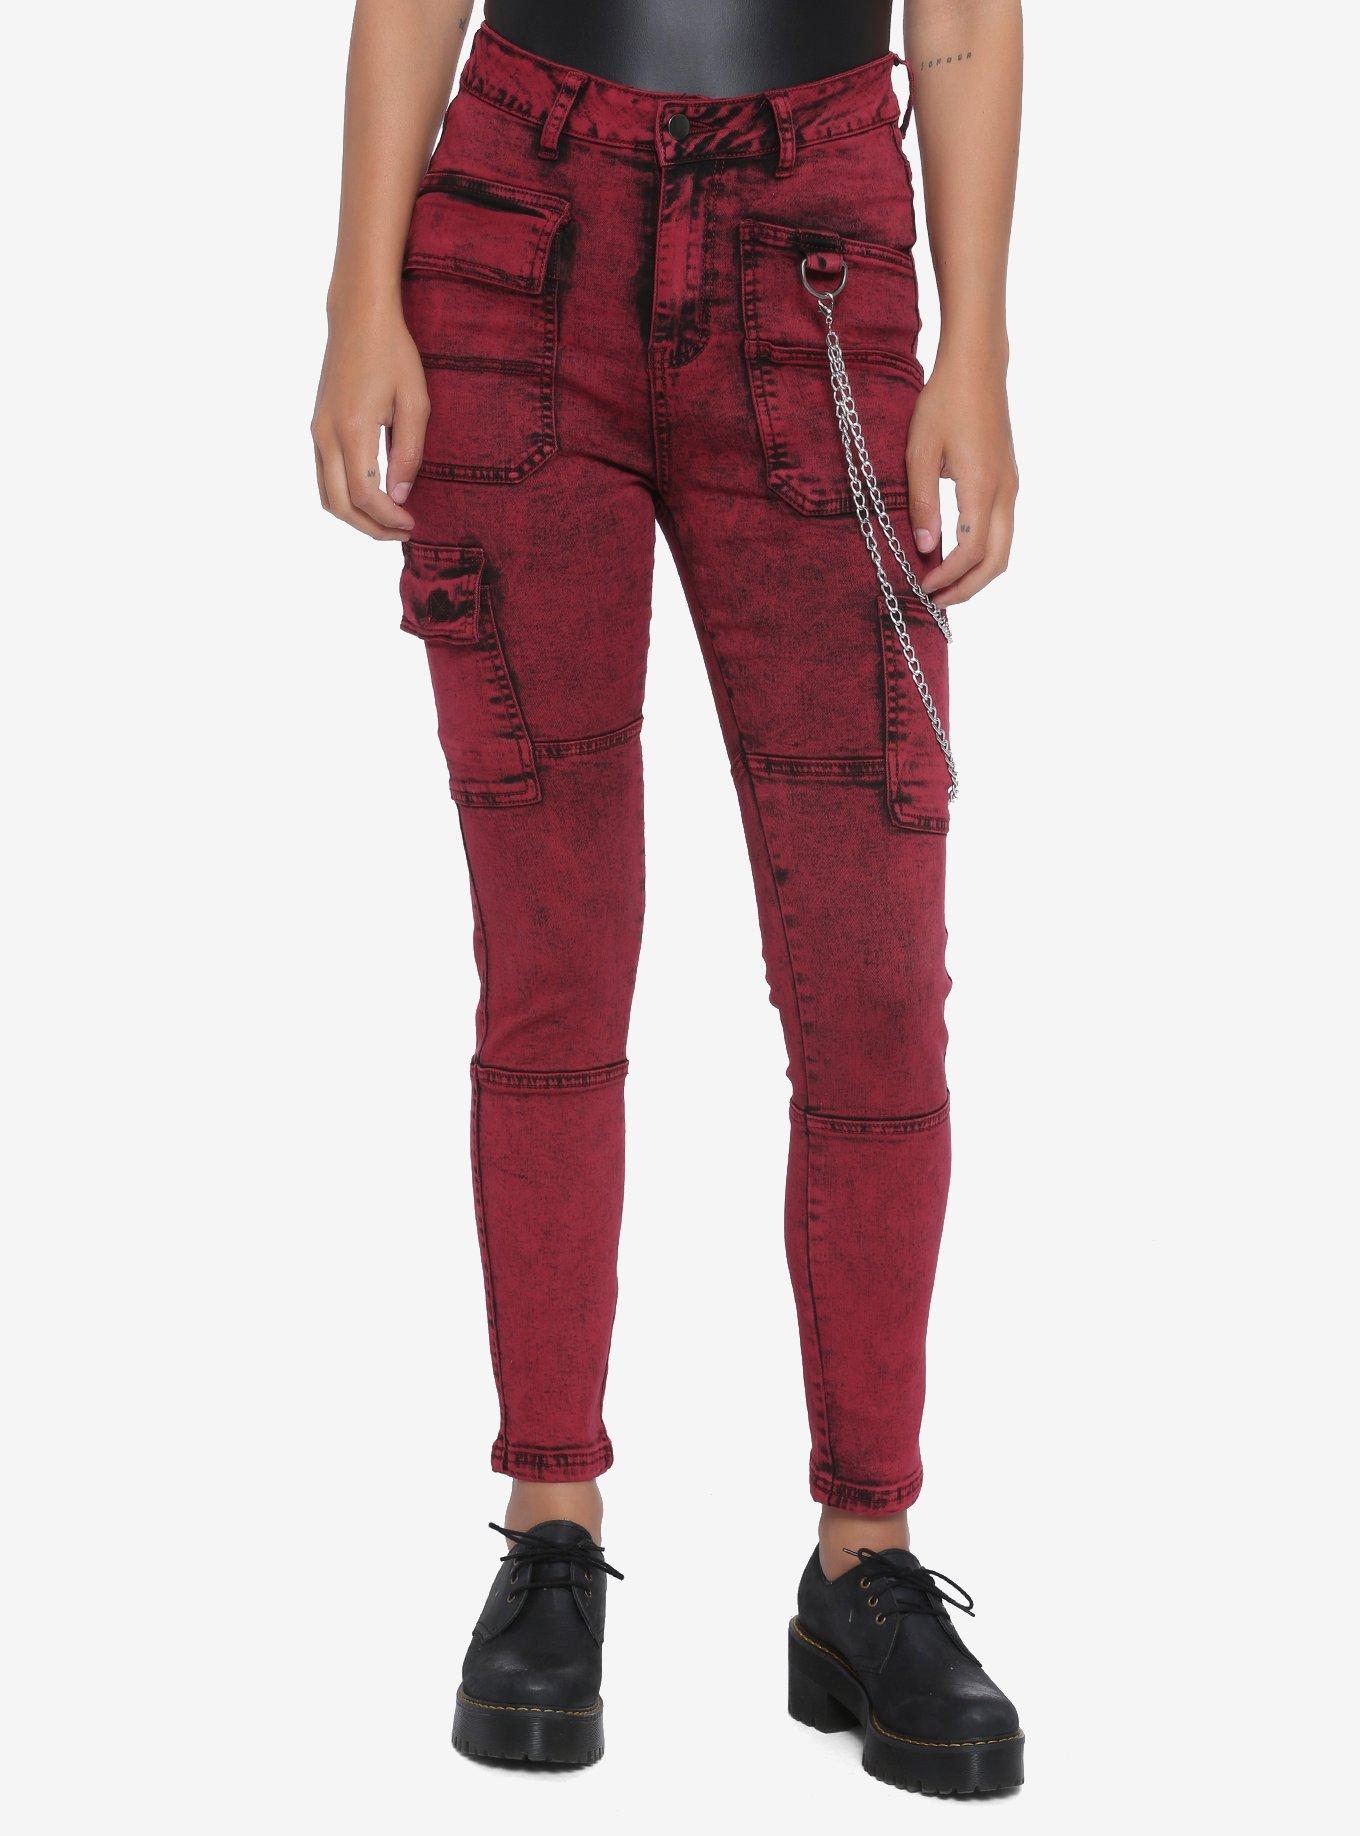 Pockets & Chains Red Washed Skinny Jeans, RED, hi-res